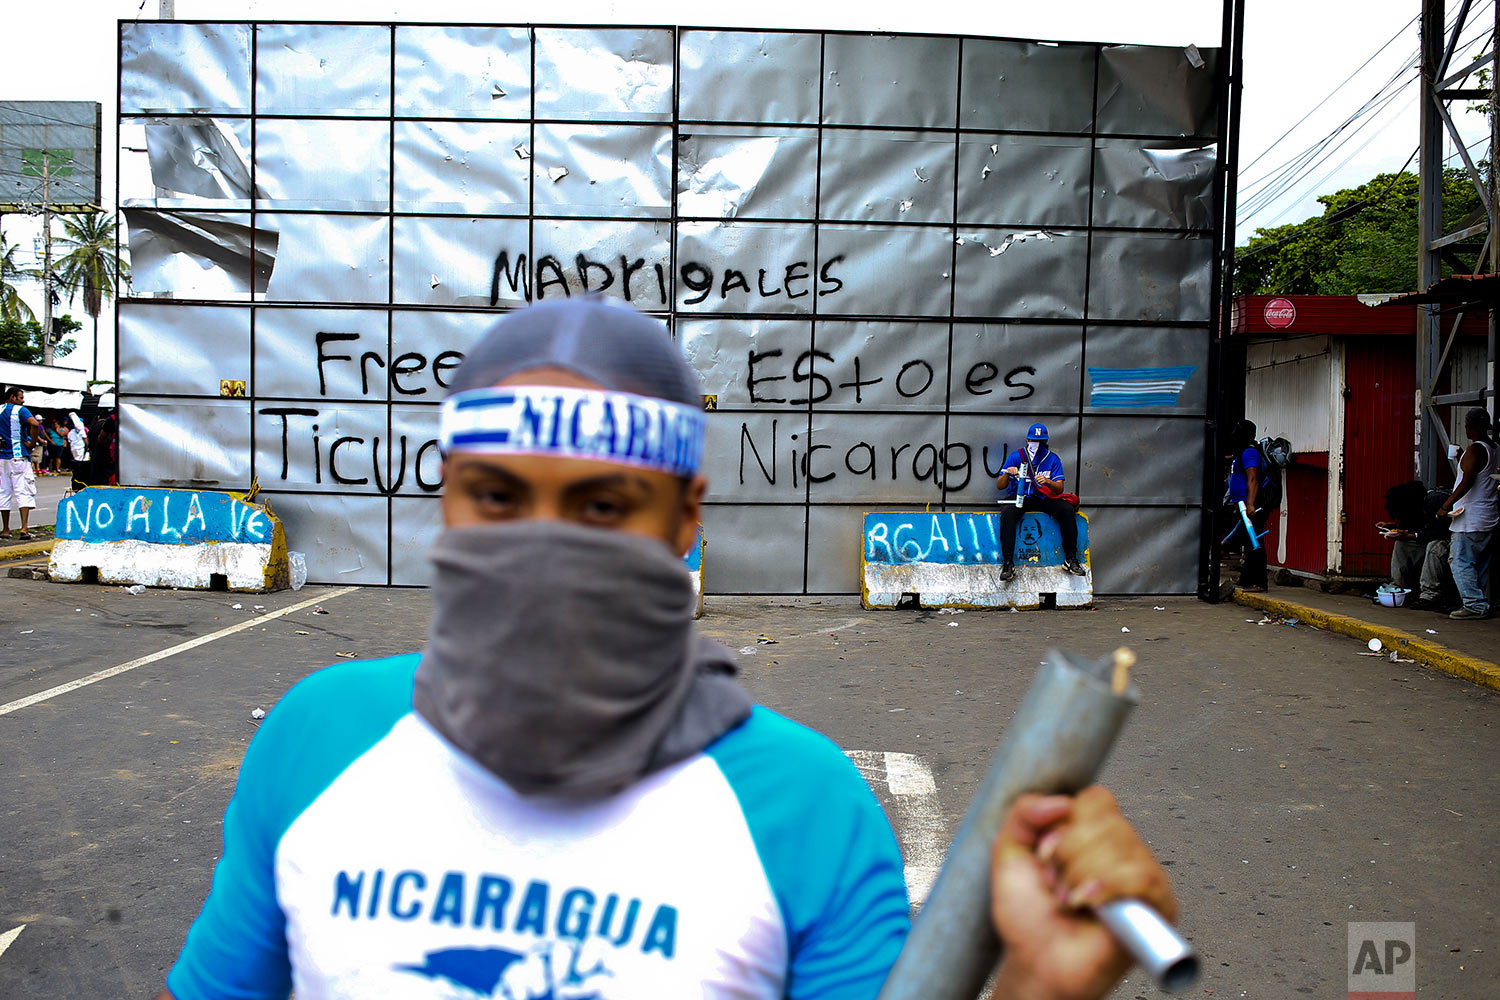  In this June 6, 2018 photo, an anti-government protester poses for a picture holding a homemade mortar at a roadblock set up by protesters in Ticuantepe, Nicaragua. (AP Photo/Esteban Felix) 